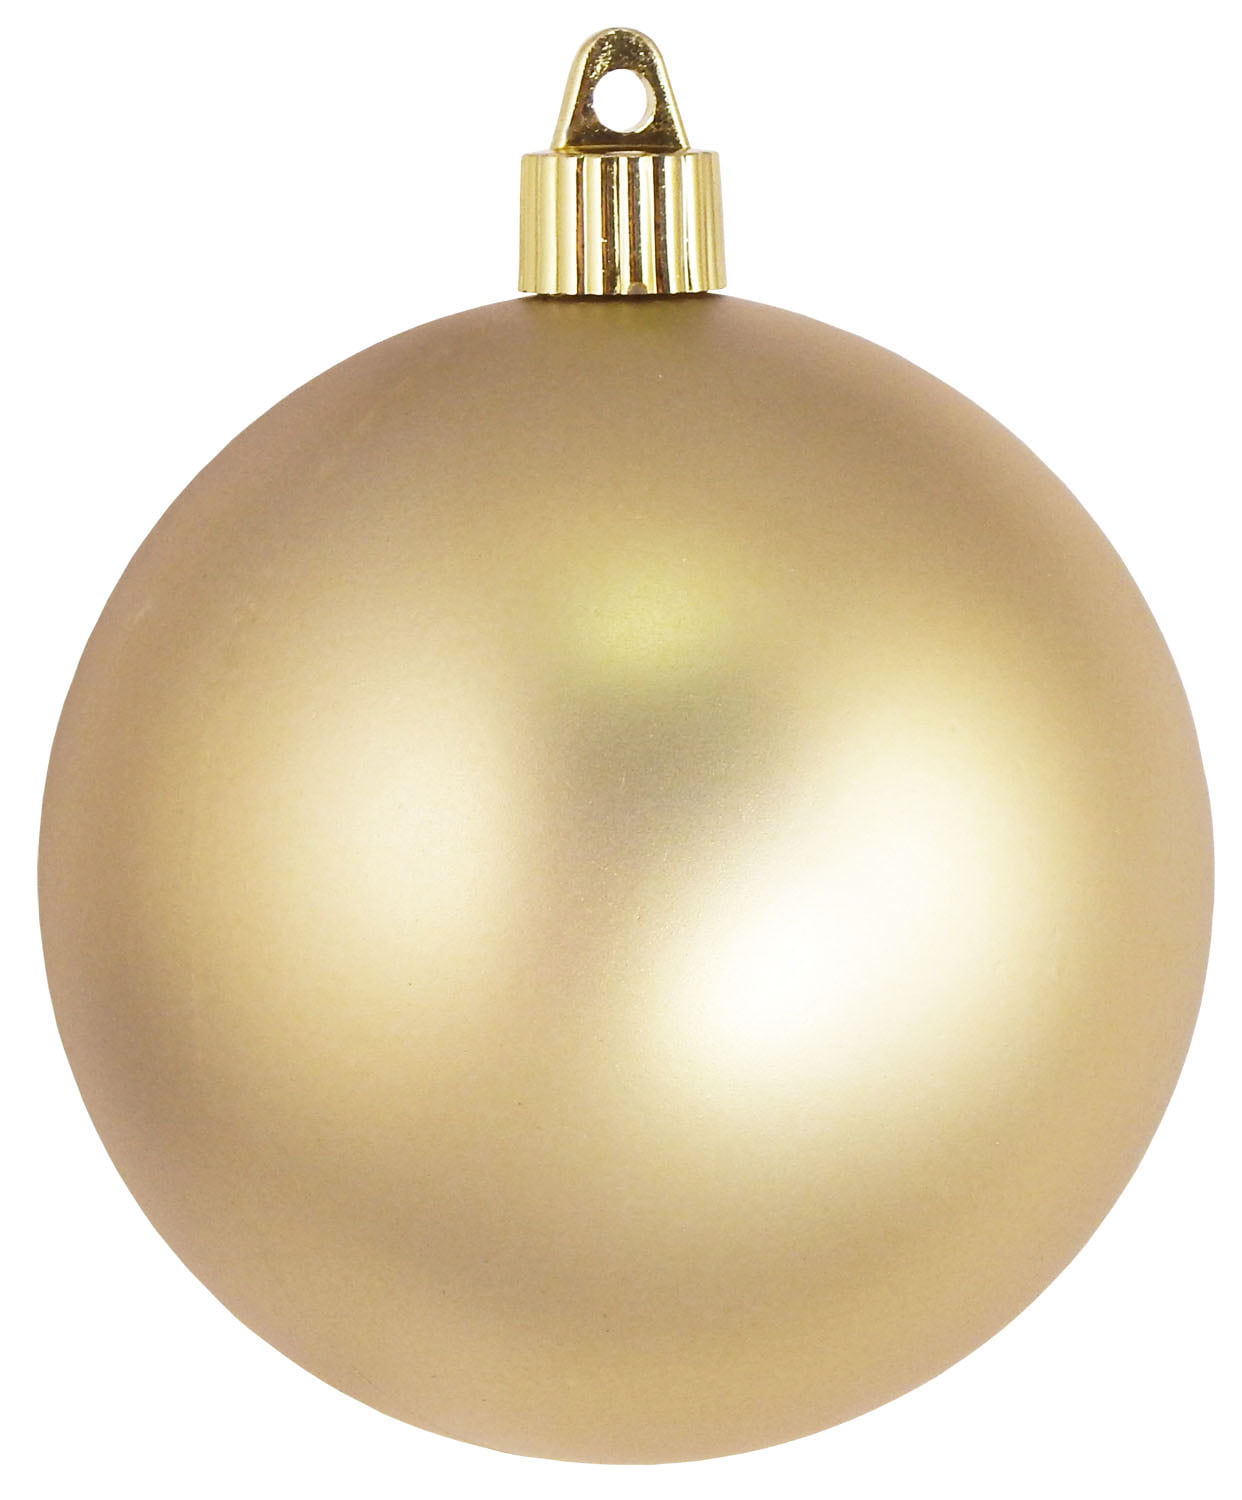 4'' (100mm) Shatterproof Matte Gold Christmas Ornament by Christmas by Krebs